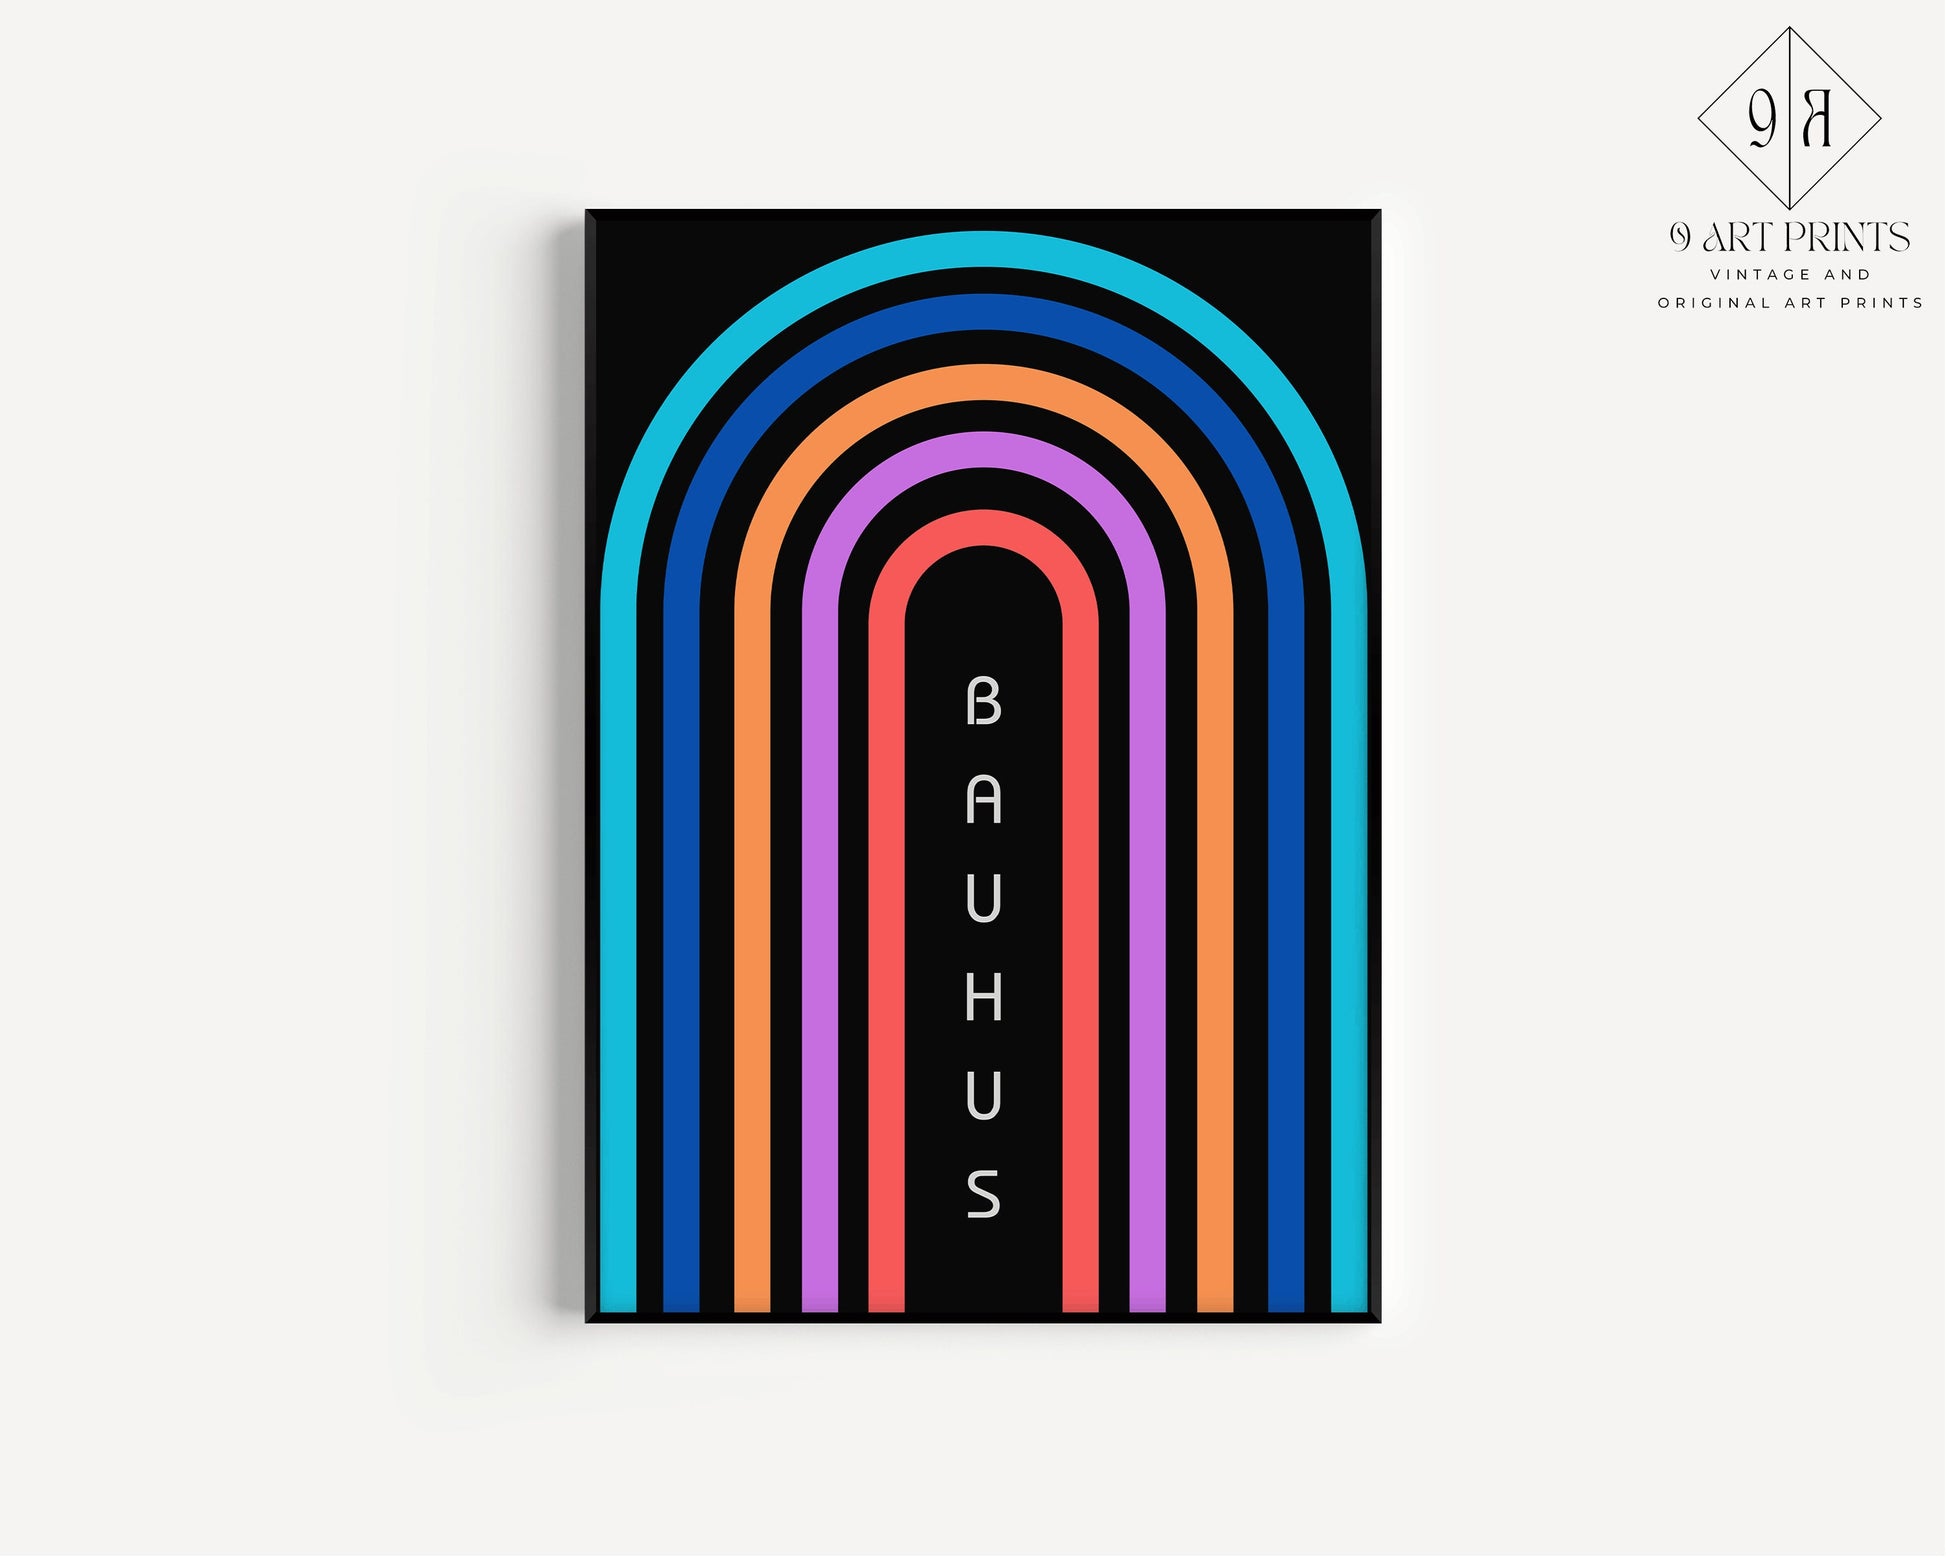 Framed Colorful Bauhaus Arches Poster Mid-Century Modern Exhibition Print 60s Vintage Abstract Museum Art Ready to hang Home Office Decor